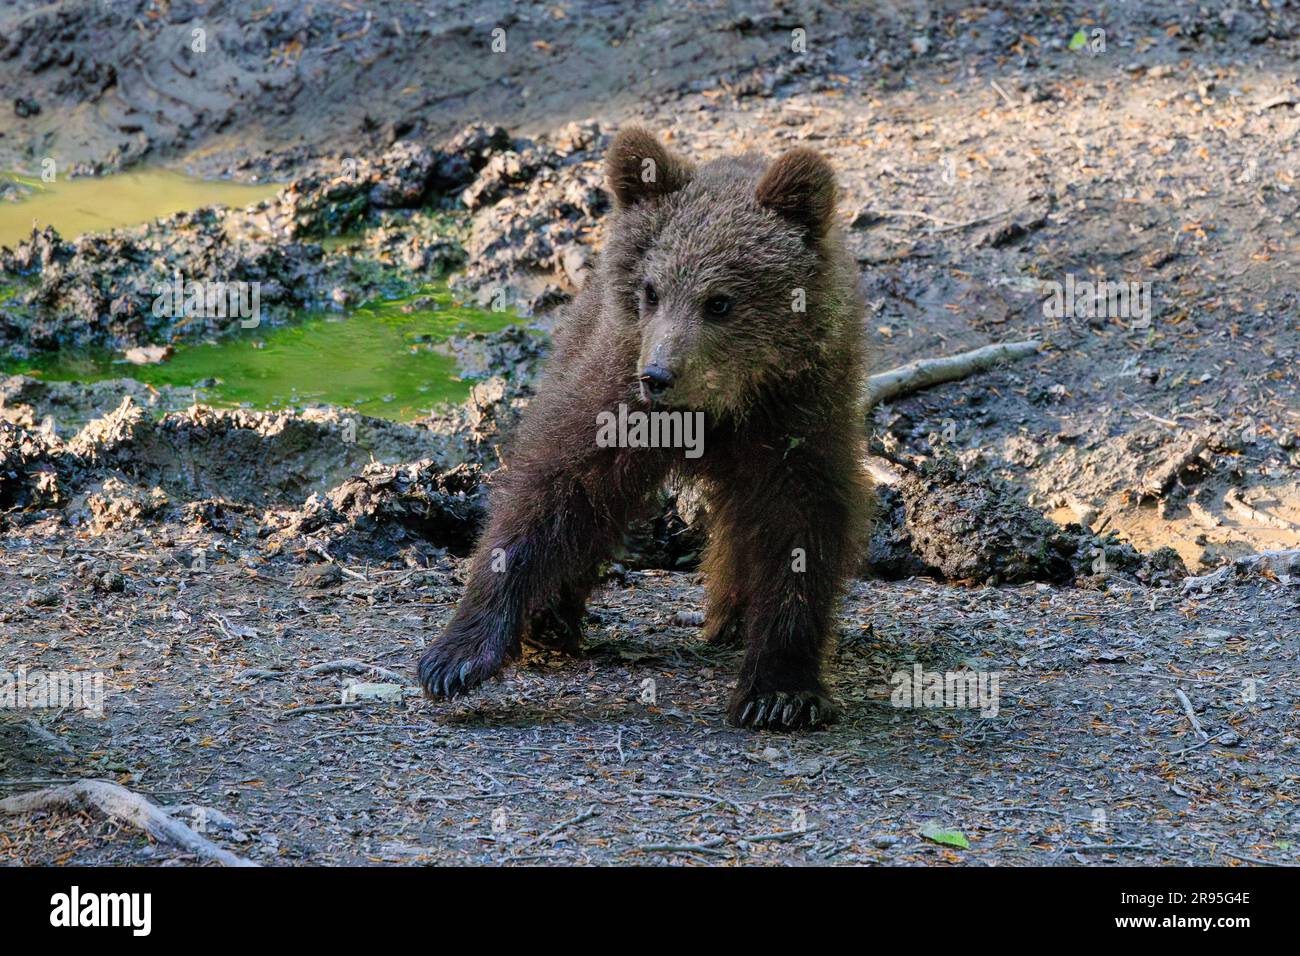 cute bear cub walking in a forest clearing at twilight on a bear watching tour in slovenia Stock Photo